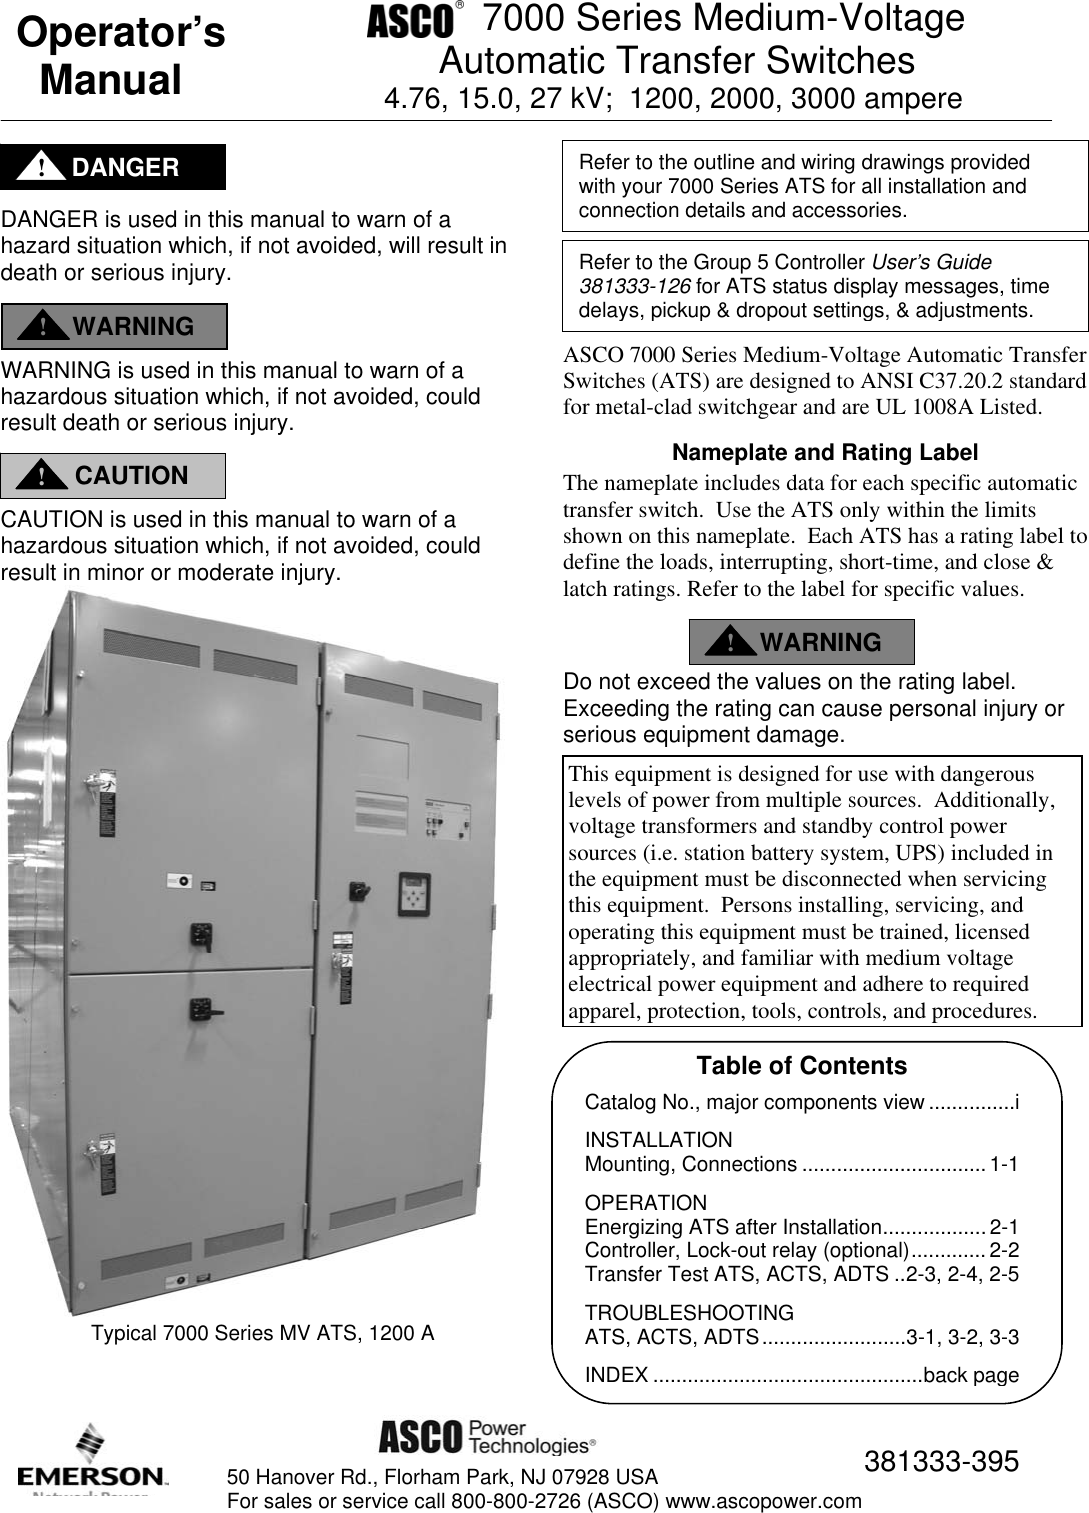 Page 1 of 12 - Emerson Emerson-Asco-7000-Series-Medium-Voltage-Transfer-Switch-Users-Manual- 381333-395 Operator's Manual For 7000 Series Medium-Voltage Automatic Transfer Switches  Emerson-asco-7000-series-medium-voltage-transfer-switch-users-manual